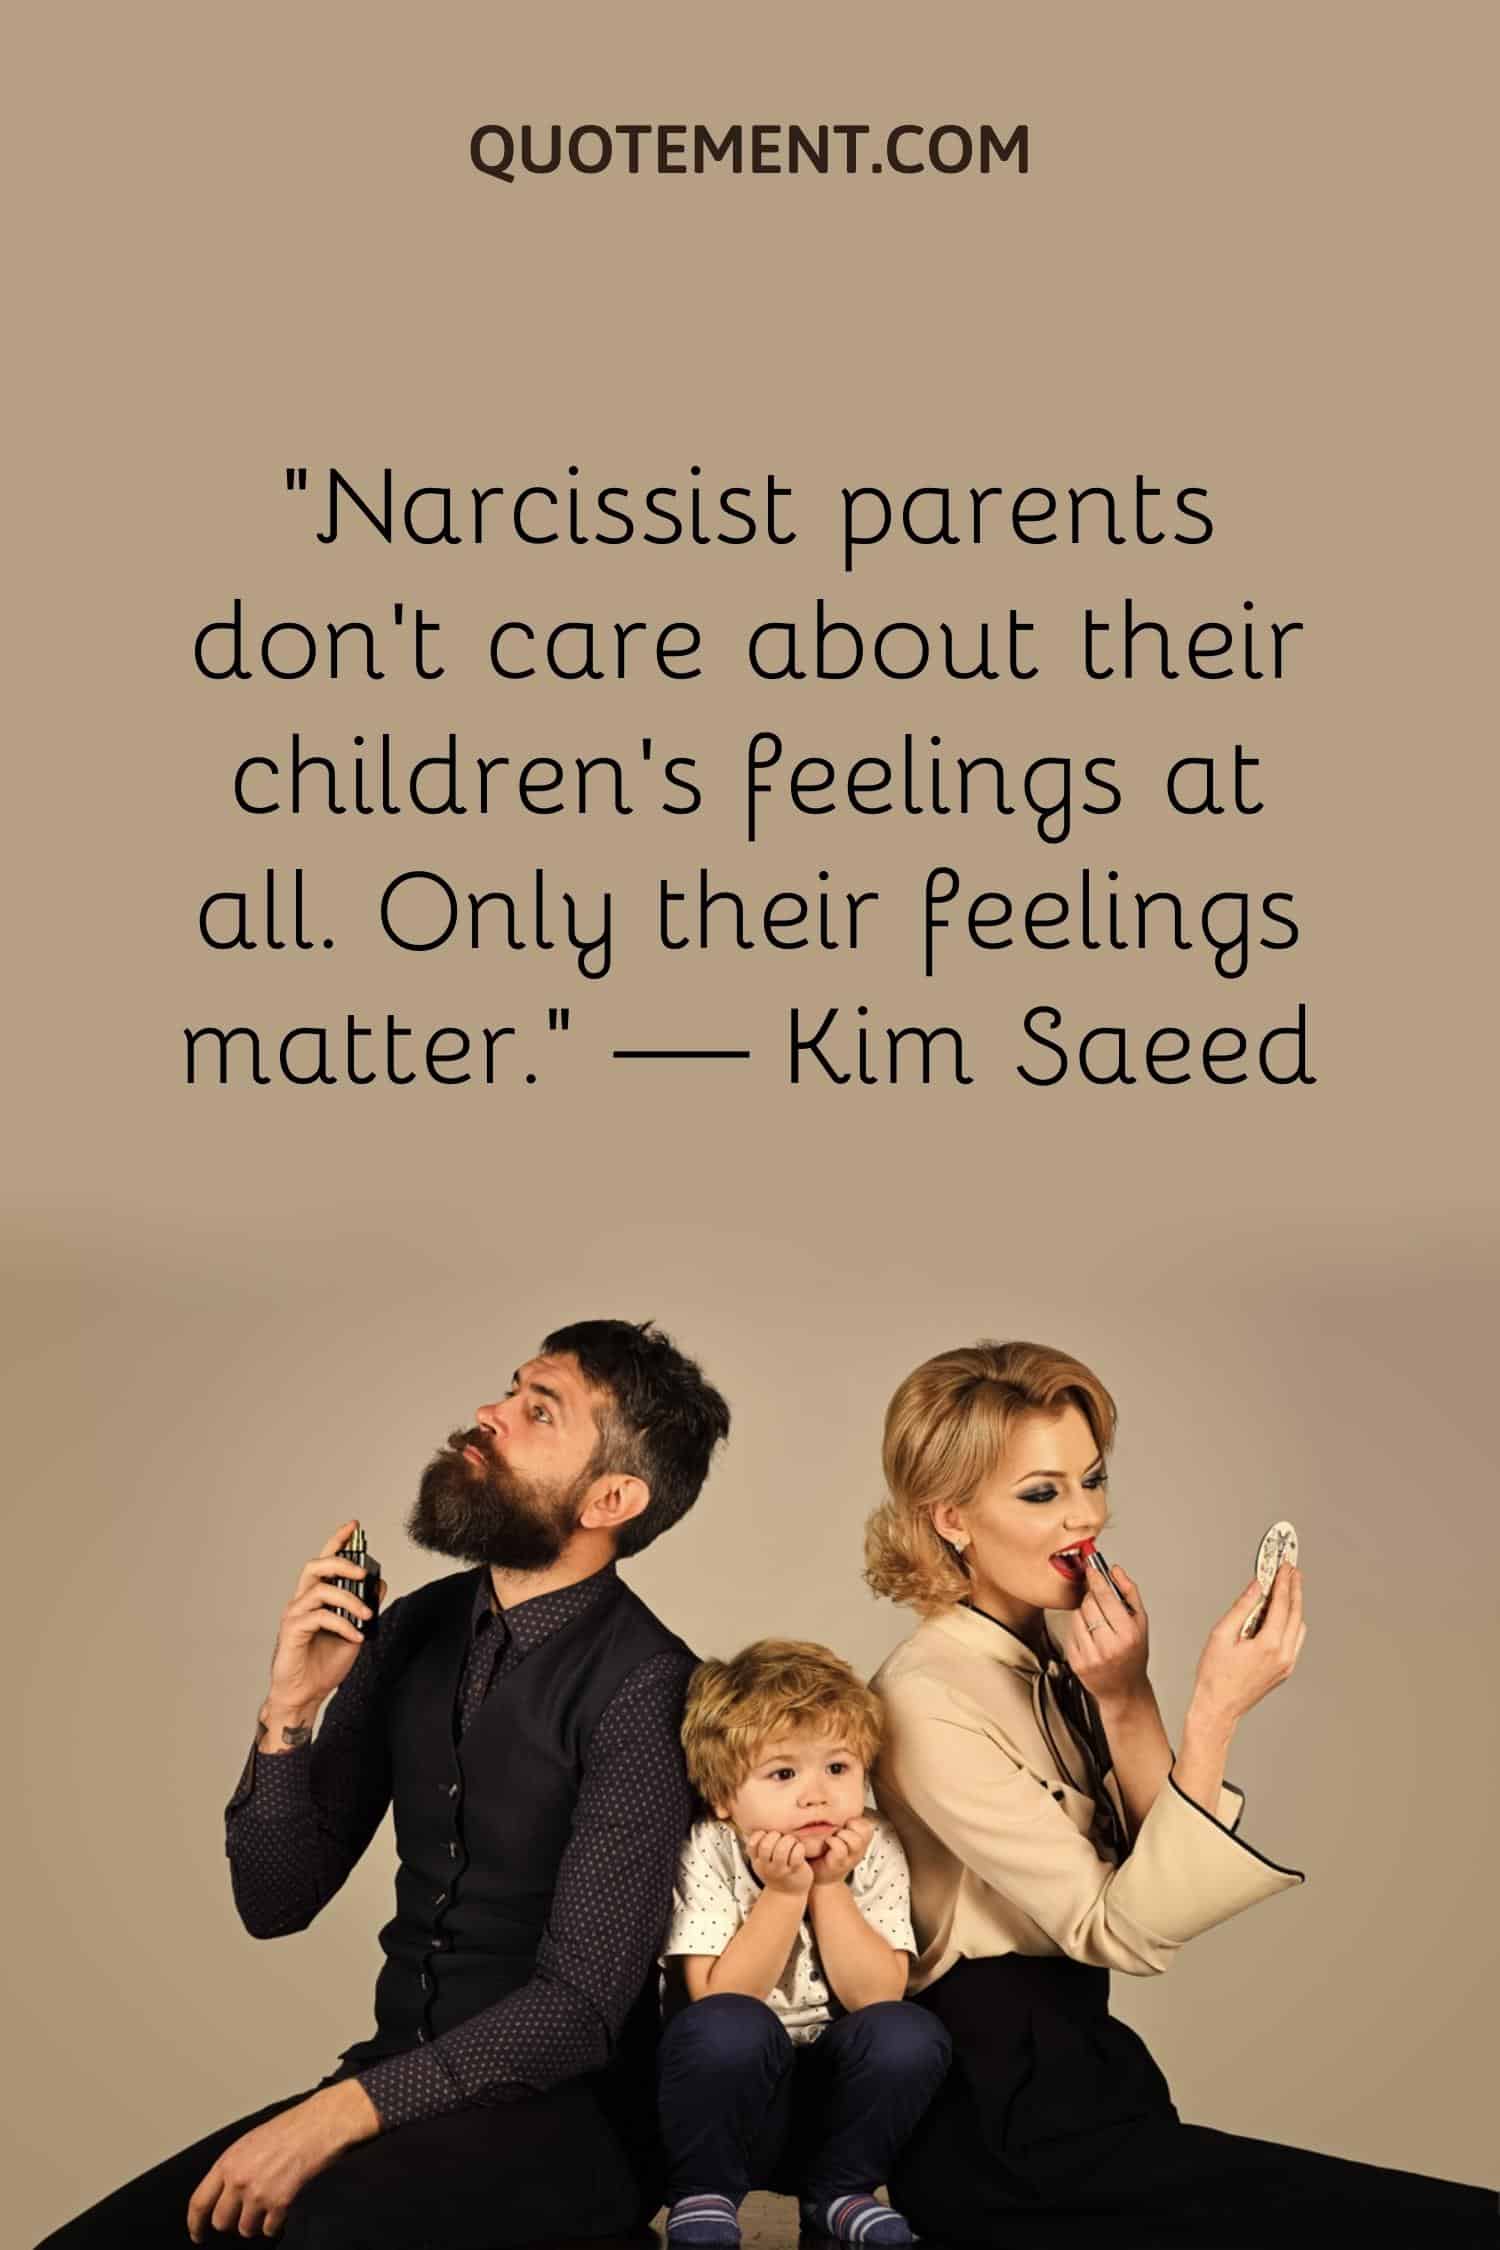 Narcissist parents don’t care about their children’s feelings